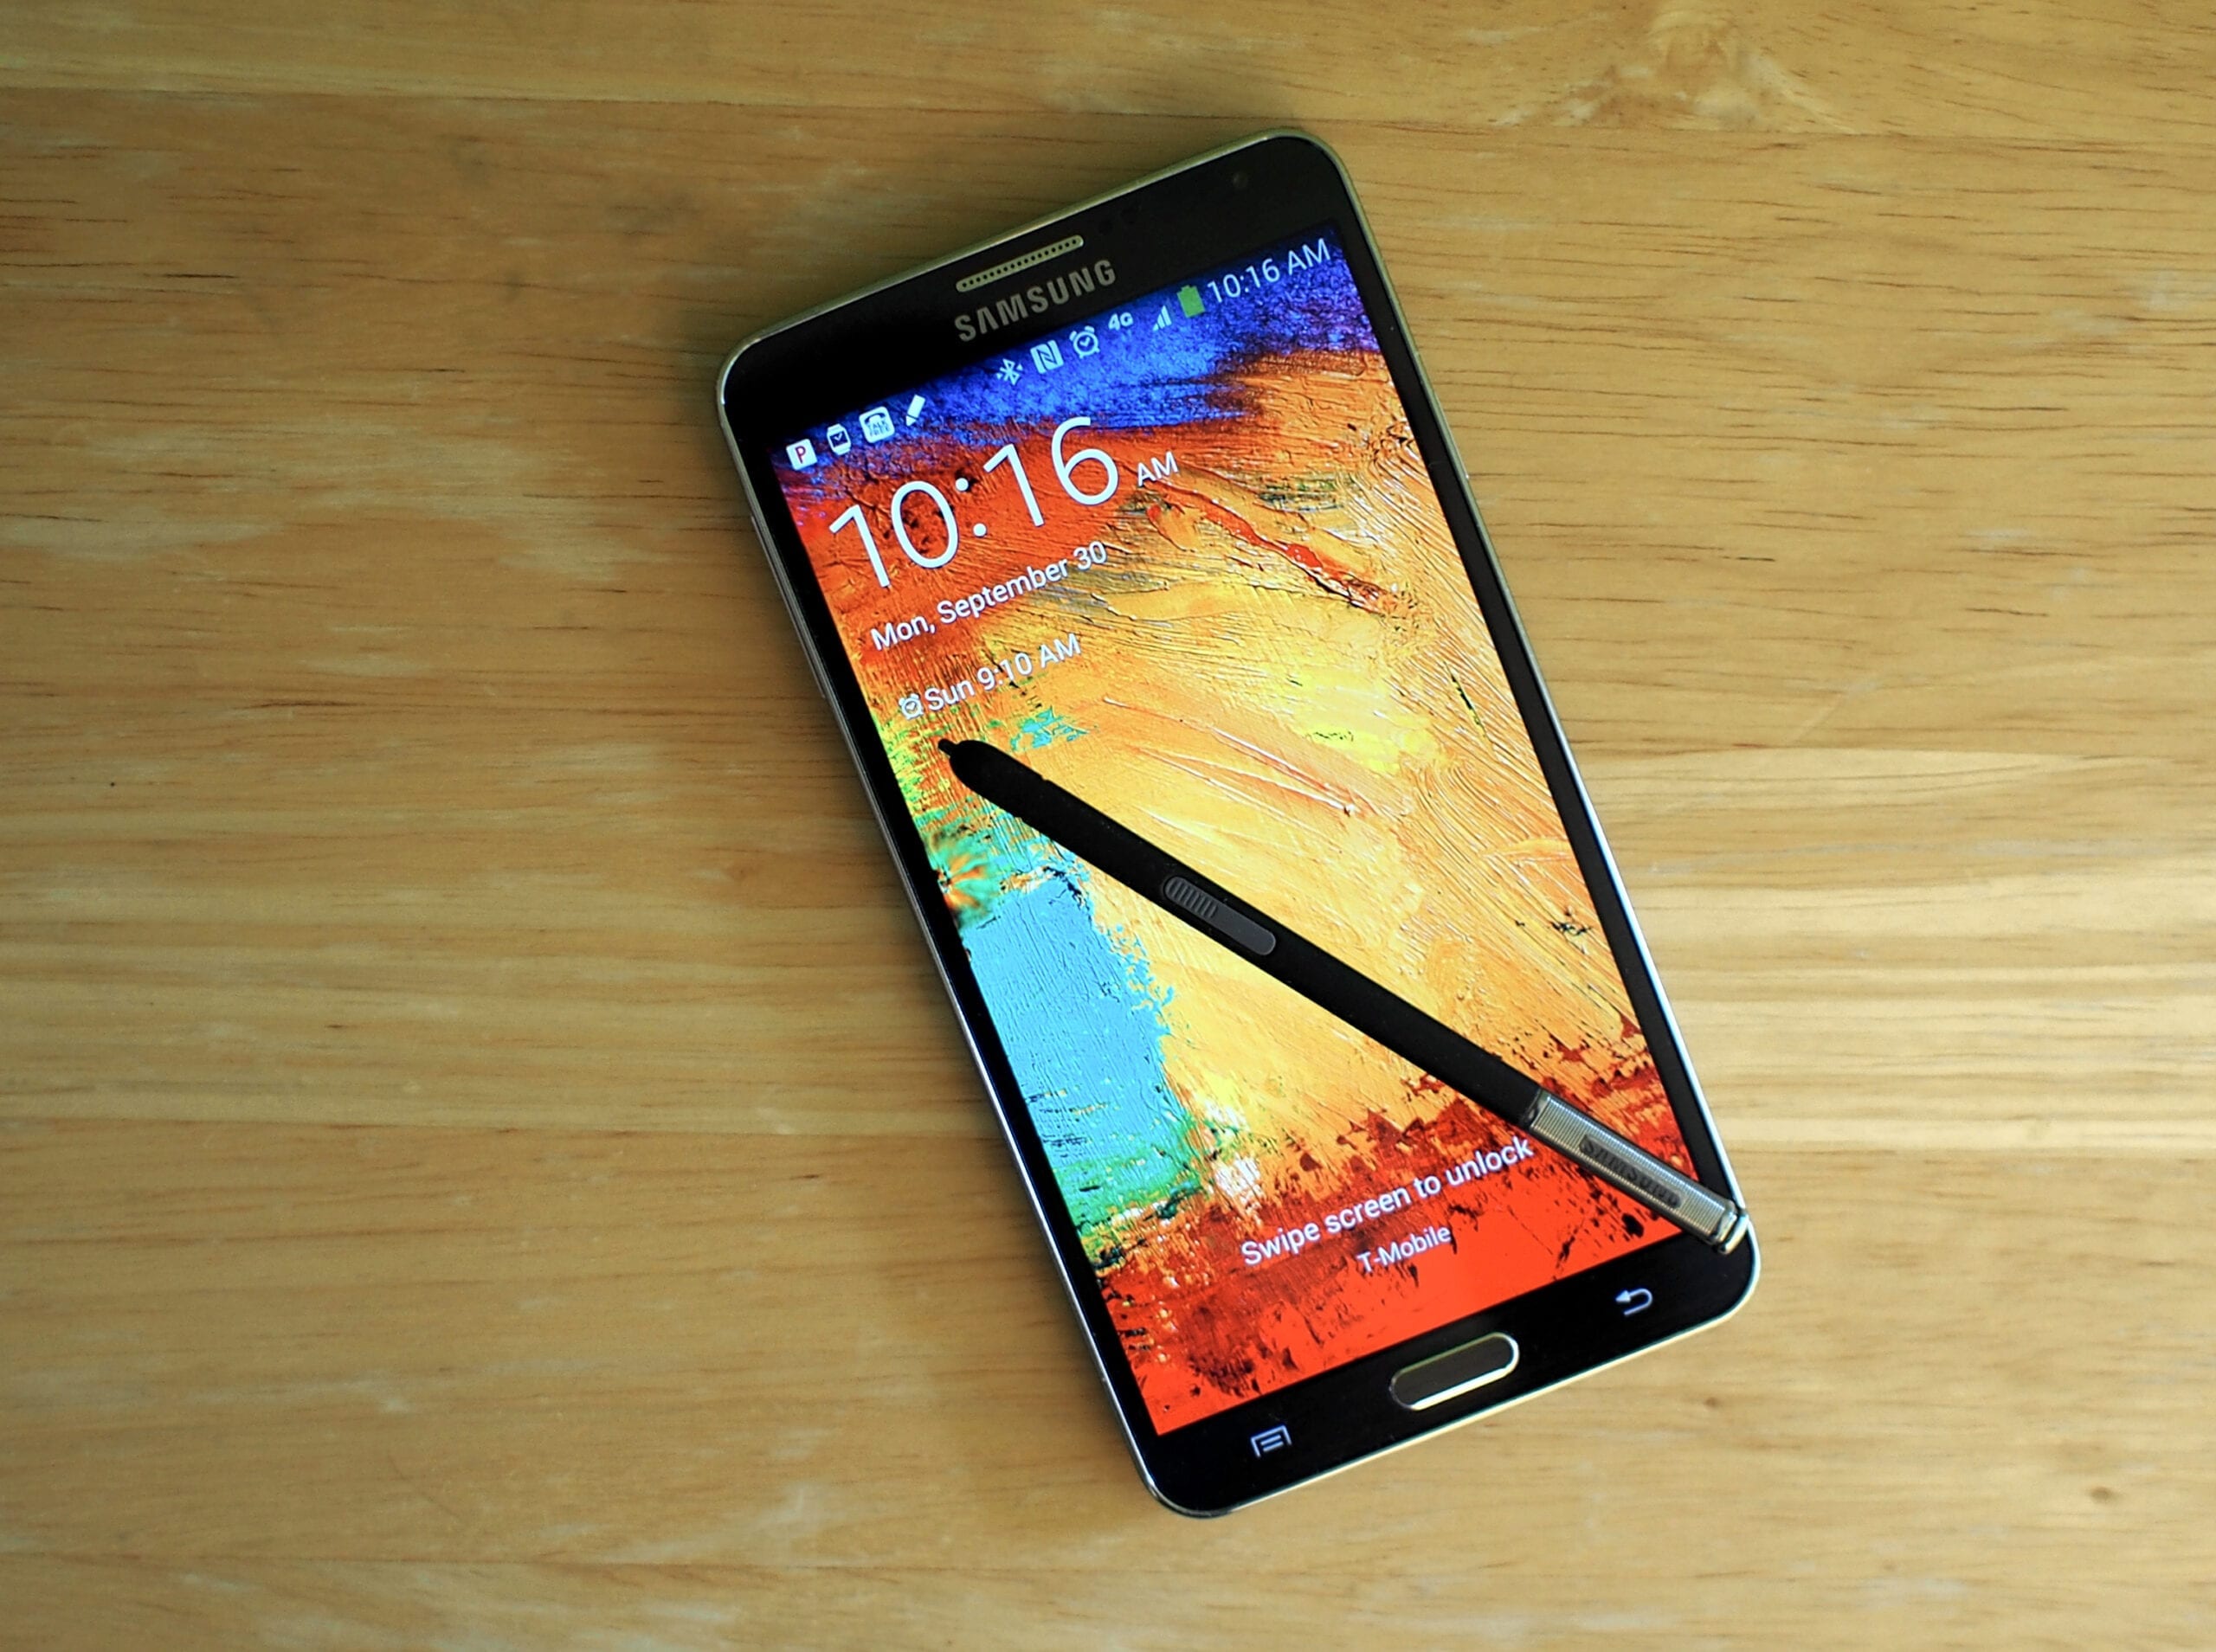 The first Samsung Galaxy Note 4 have manufacturing flaws